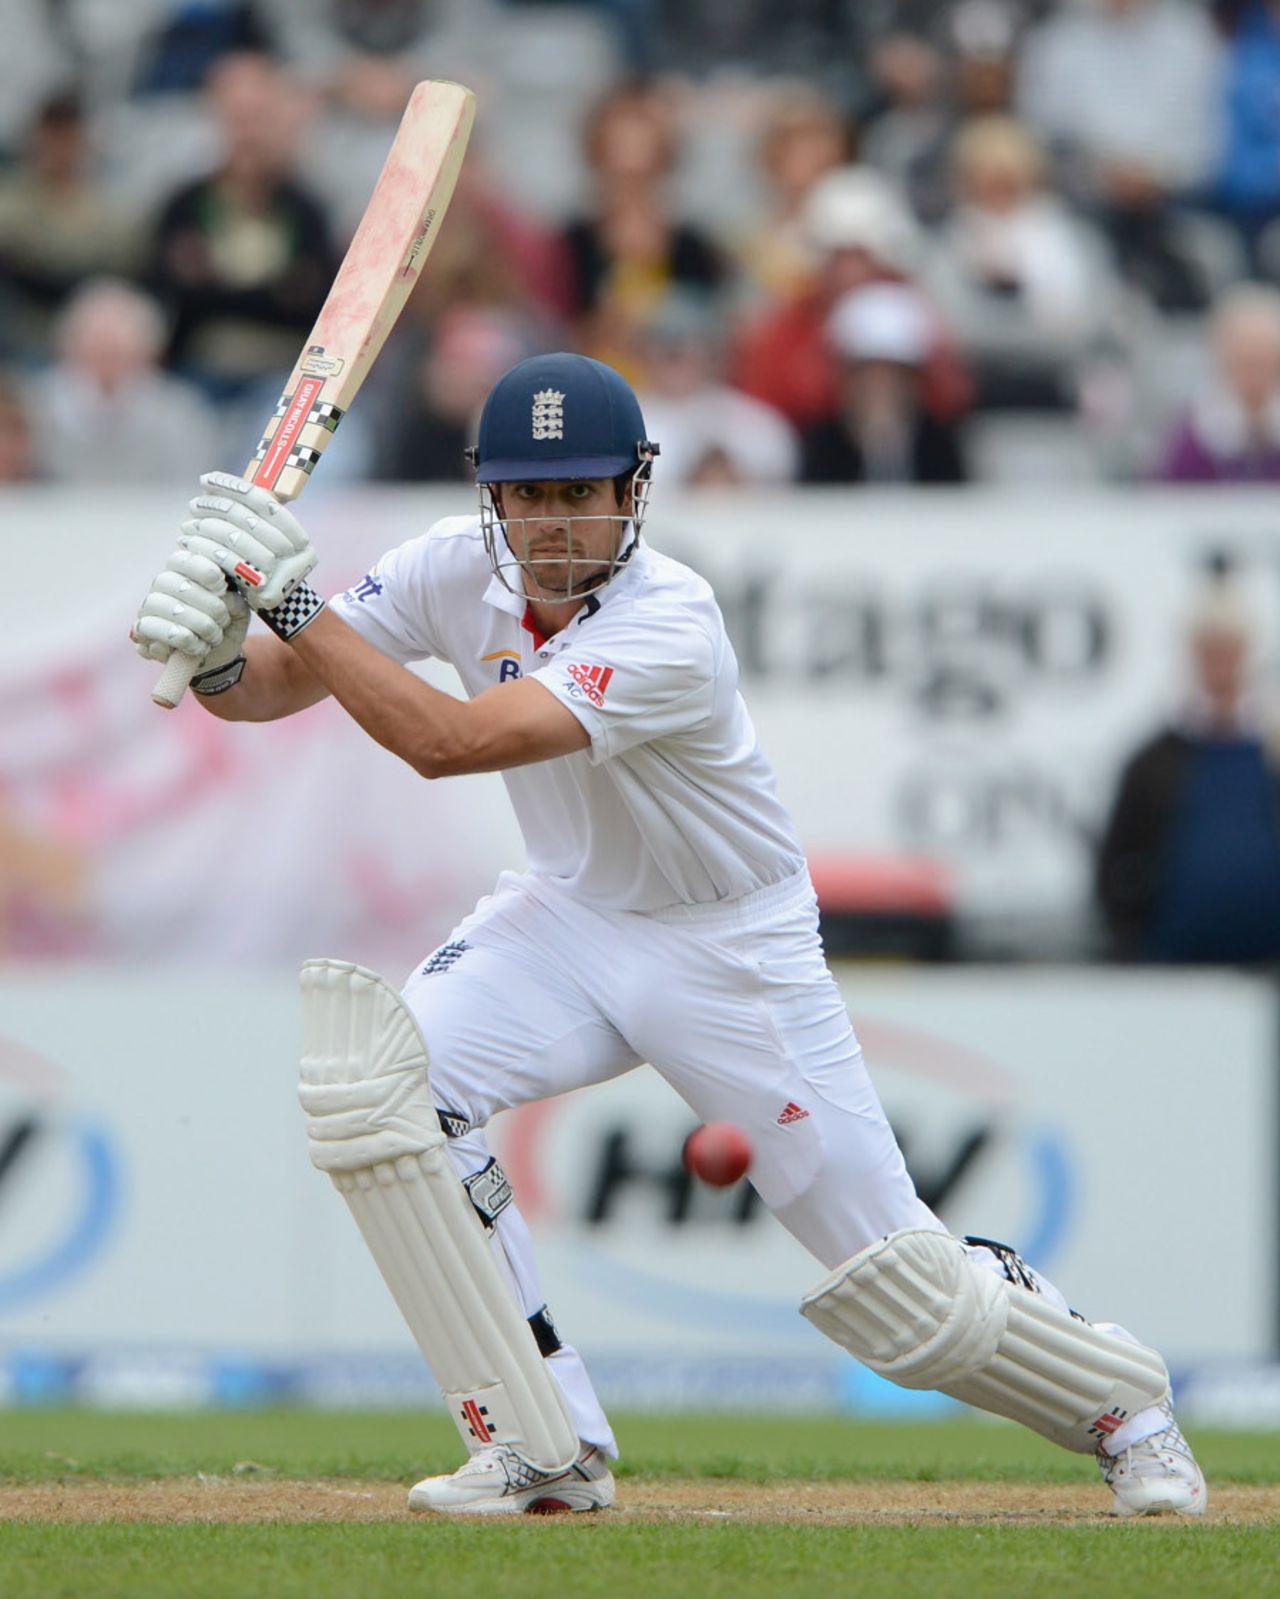 Alastair Cook drives during England's century opening stand, New Zealand v England, 1st Test, Dunedin, 4th day, March 9, 2013